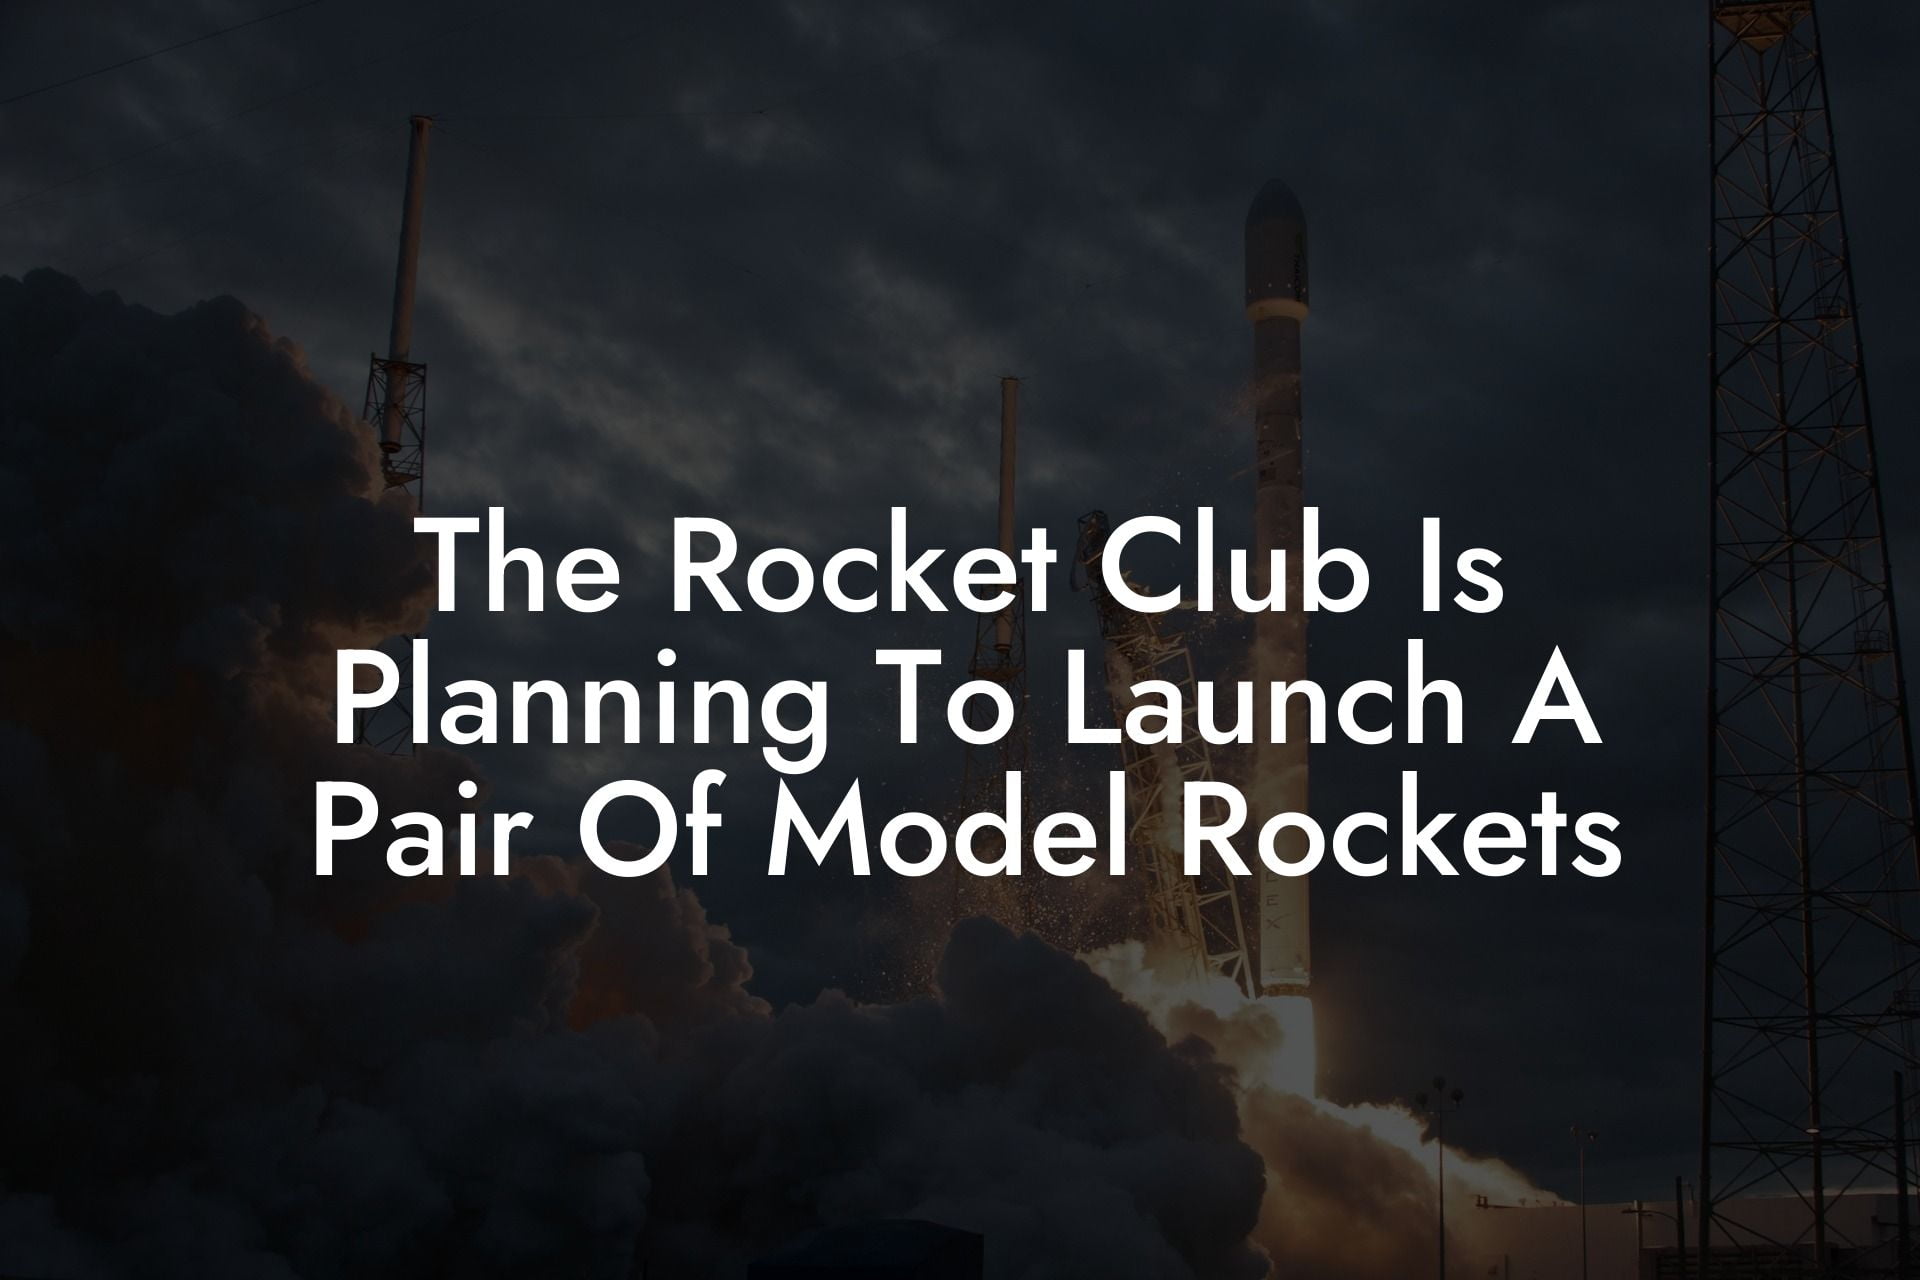 The Rocket Club Is Planning To Launch A Pair Of Model Rockets